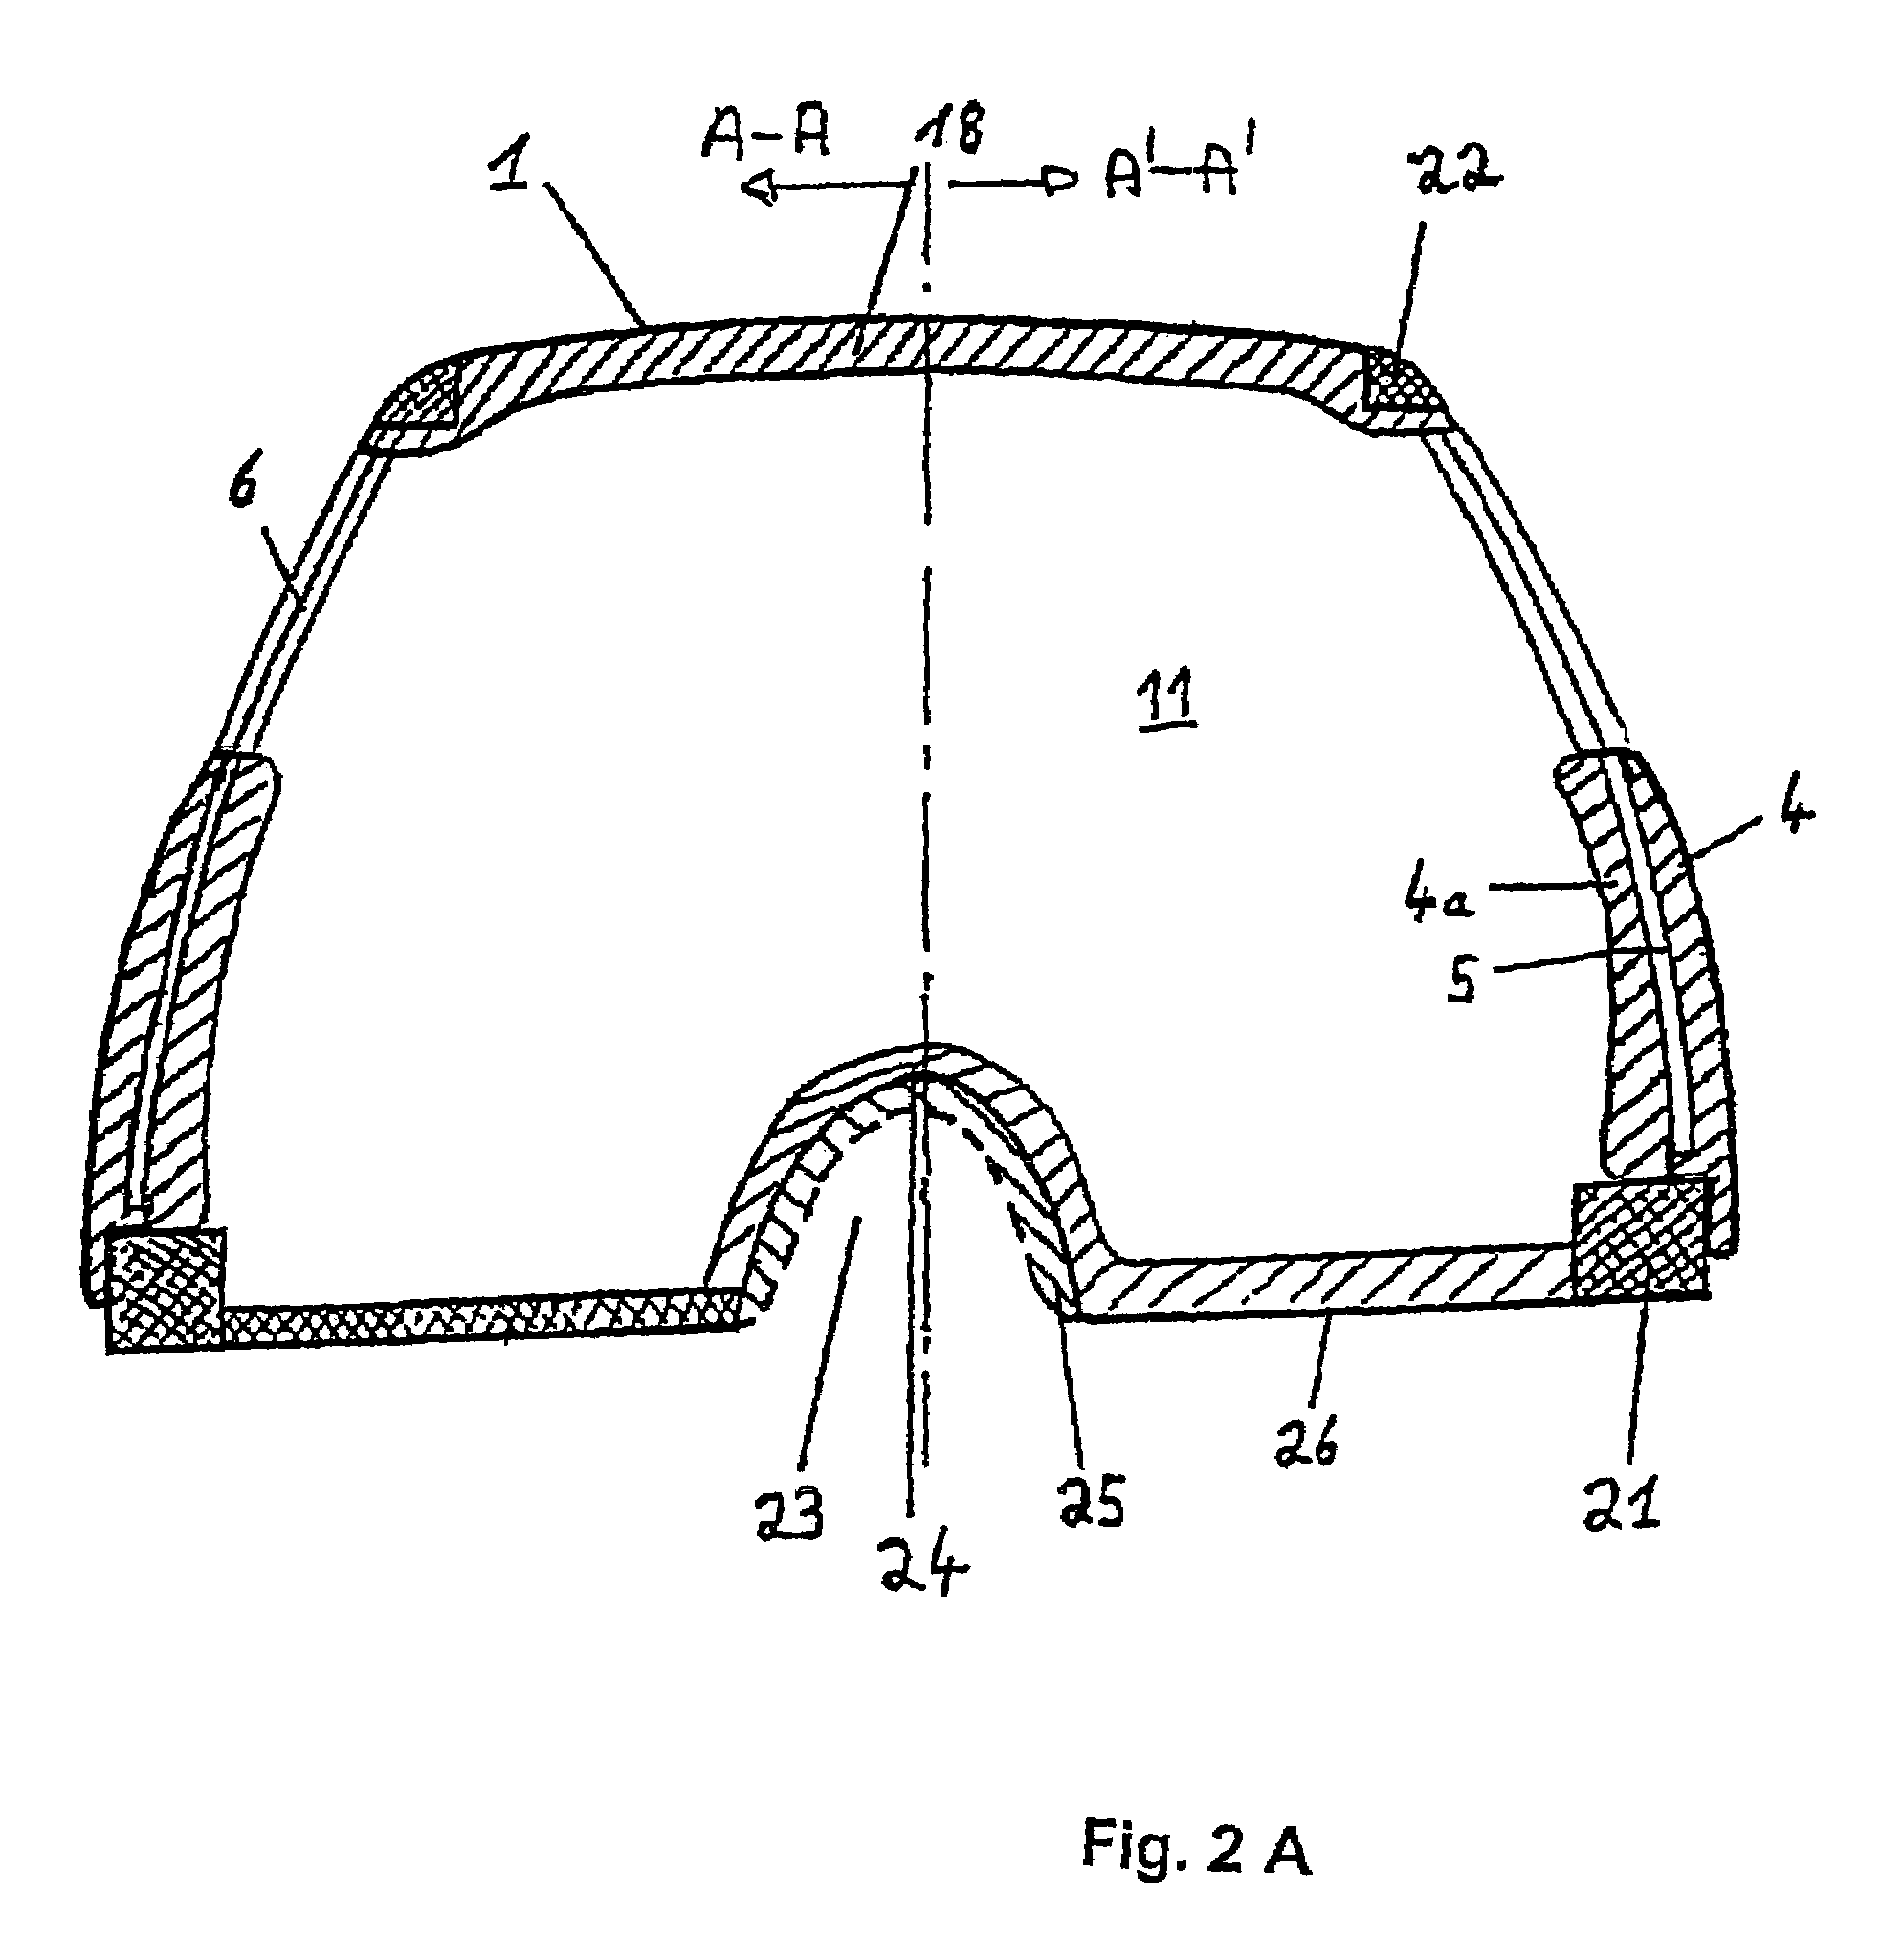 Motor vehicle passenger compartment heat insulation and dissipation